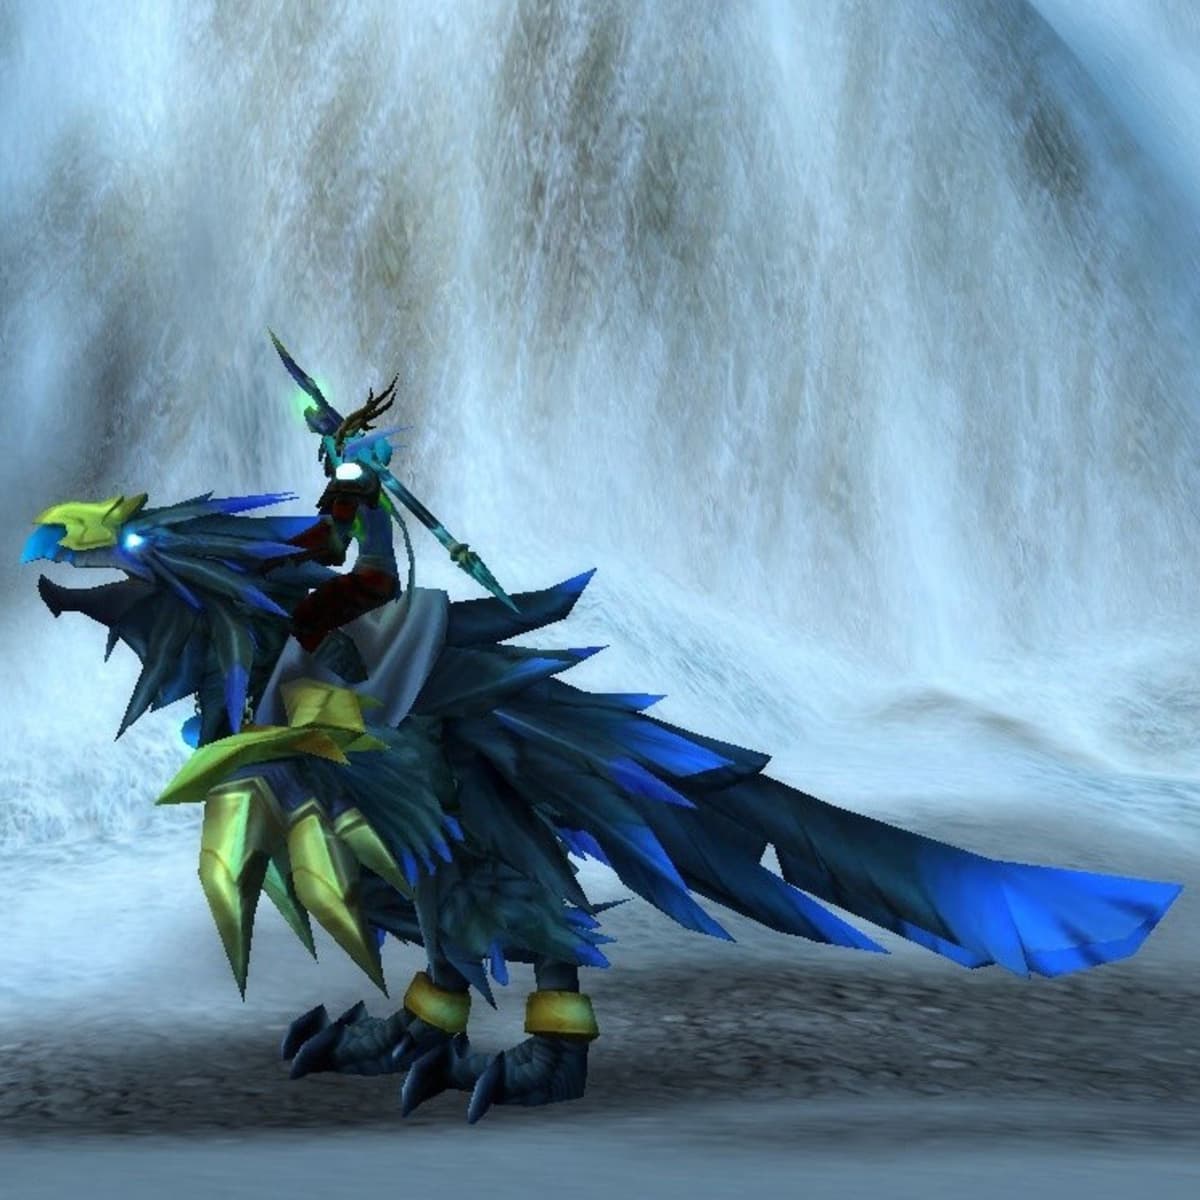 The Coolest Mounts in "World of Warcraft" - LevelSkip